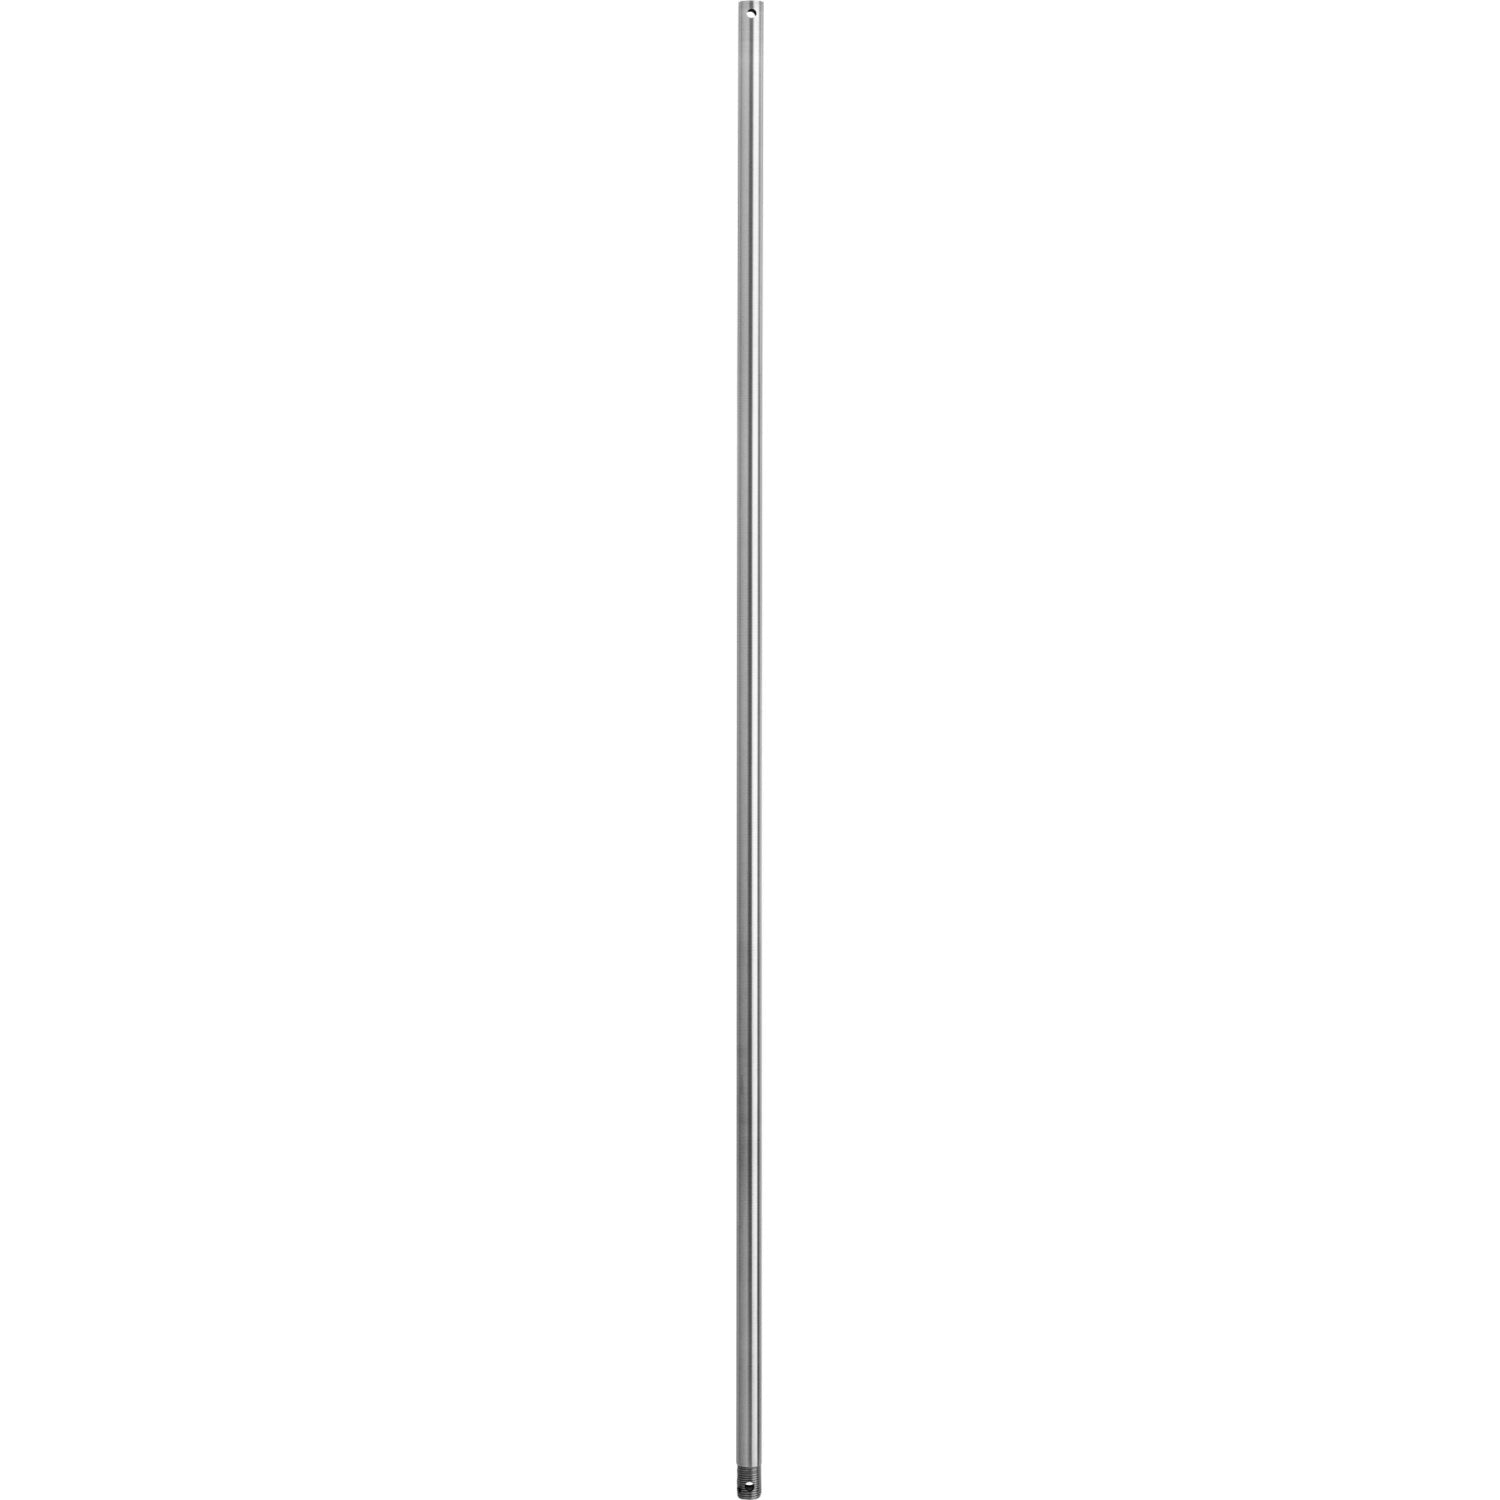 Quorum - 6-4892 - 48" Universal Downrod - 48 in. Downrods - Antique Silver